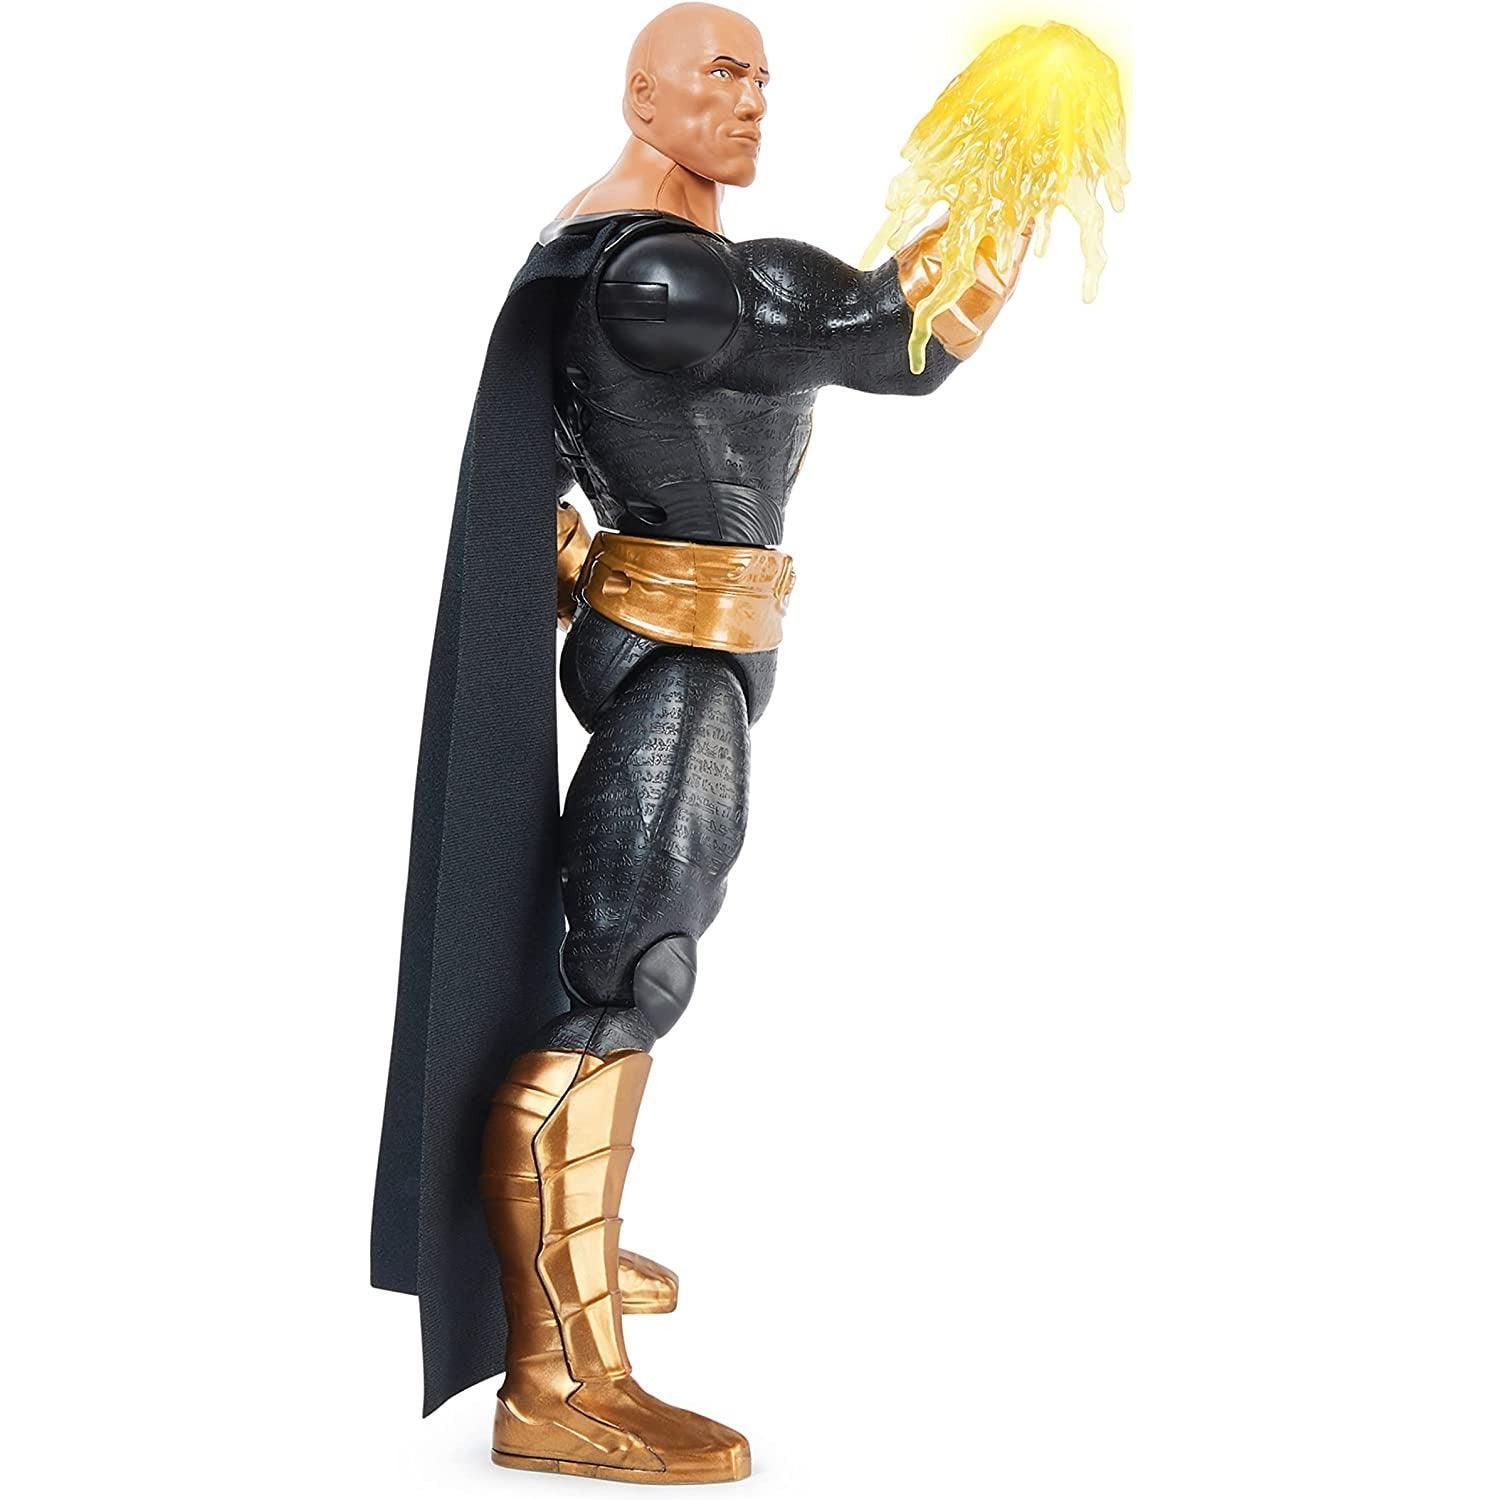 DC Comics, Power Punch Black Adam 12-inch Action Figure, 20+ Phrases and Sounds, Lights Up with 2 Accessories, Black Adam Movie - BumbleToys - 5-7 Years, Action Battling, Avengers, Black Adam, Boys, DC, OXE, Pre-Order